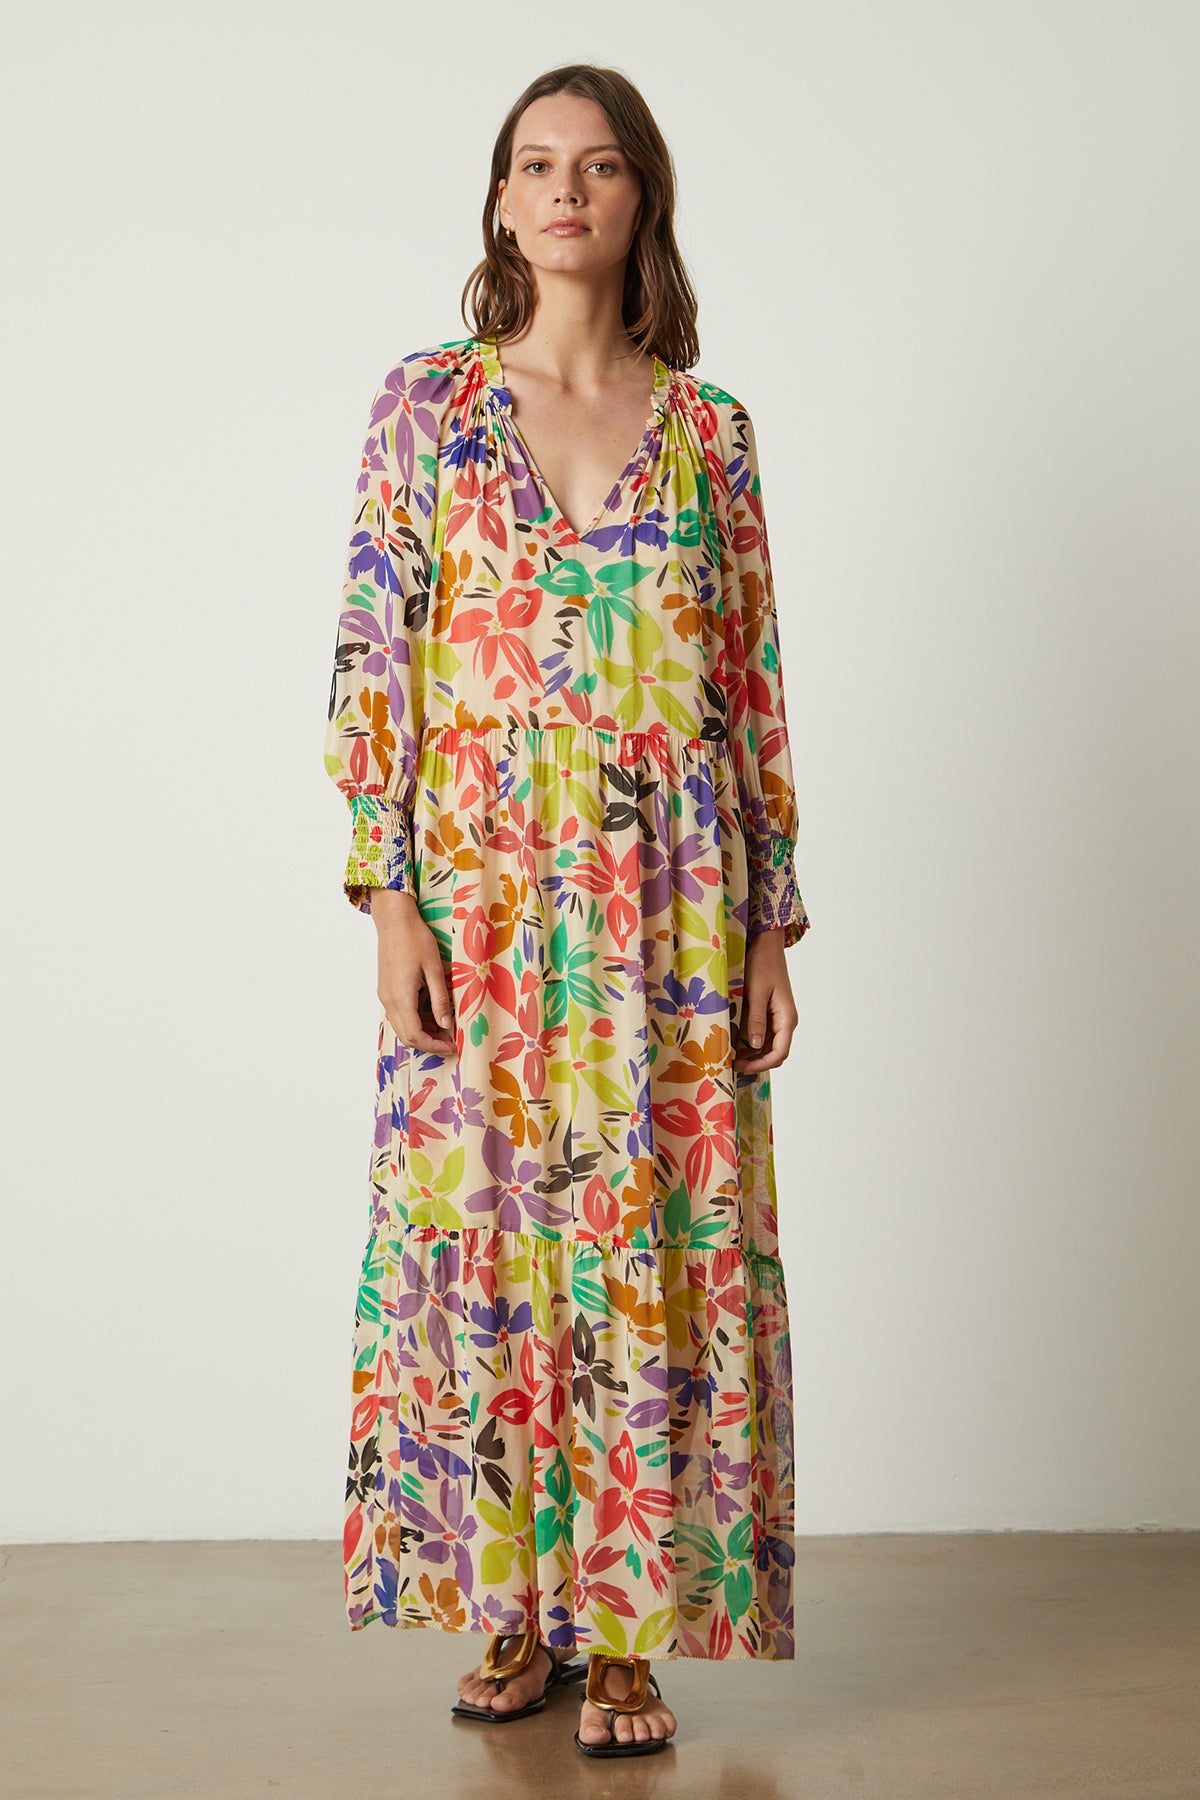 A woman wearing a SERENA PRINTED MAXI DRESS by Velvet by Graham & Spencer.-26022624592065